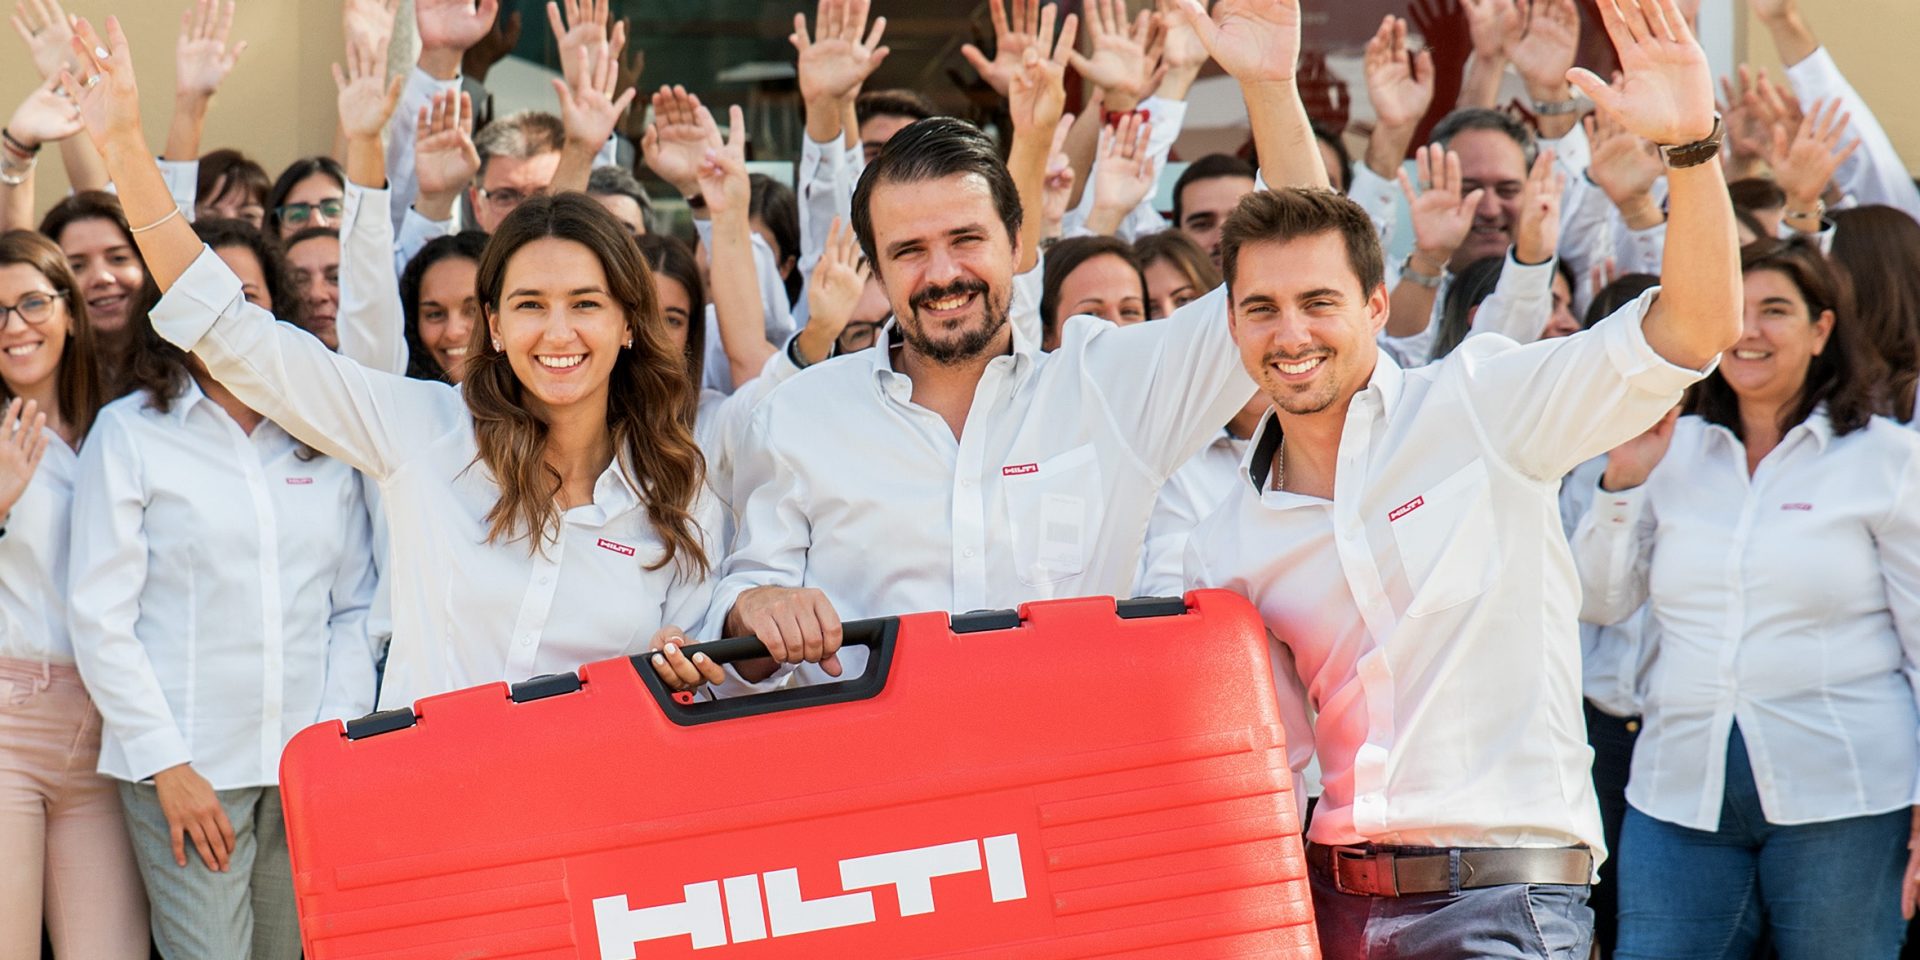 Hilti is one of the world’s best workplaces in 2021